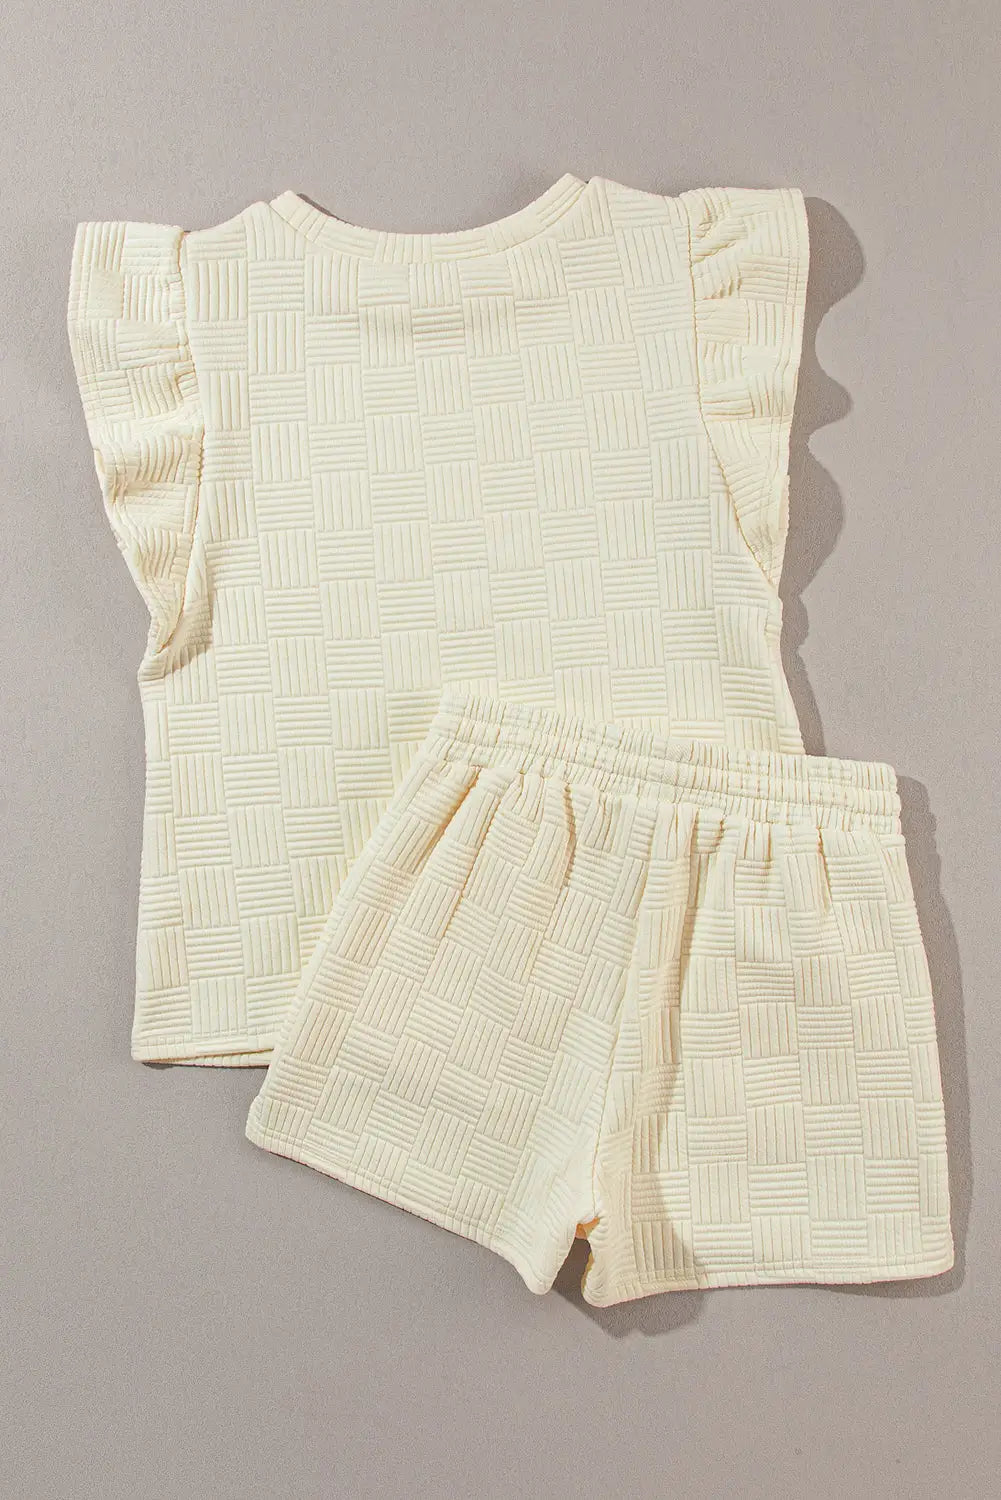 Ruffled sleeve tee and shorts set - two piece sets